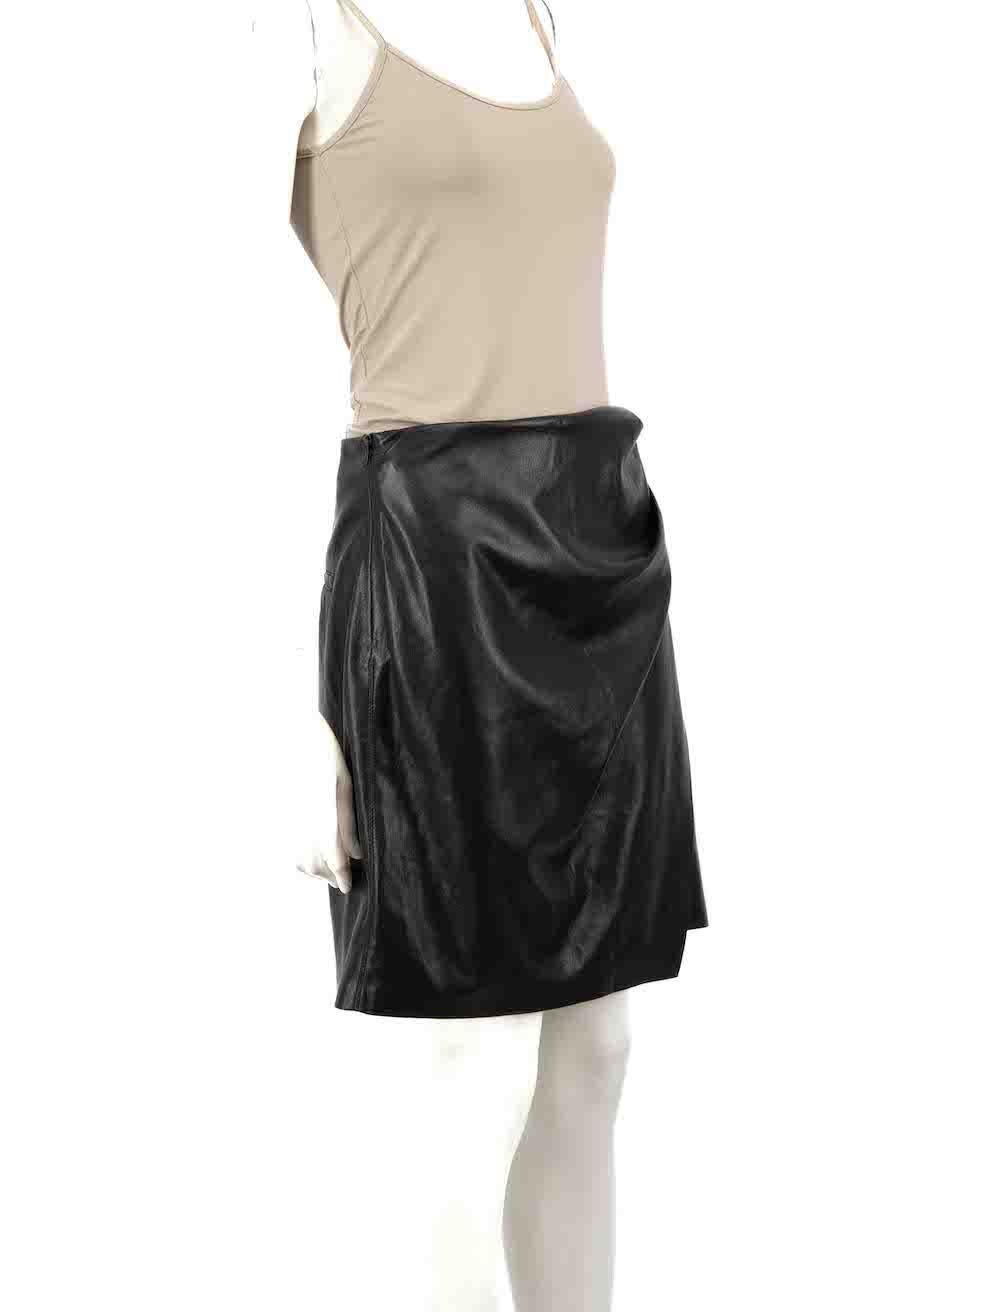 Condition
 
 CONDITION is Very good. Hardly any visible wear to skirt is evident on this used NANUSHKA designer resale item.
 
 Details
 
 
 
 Black
 
 Vegan leather
 
 Wrap skirt
 
 Mini length
 
 Ruched accent
 
 Side zip closure
 
 
 
 
 
 Made